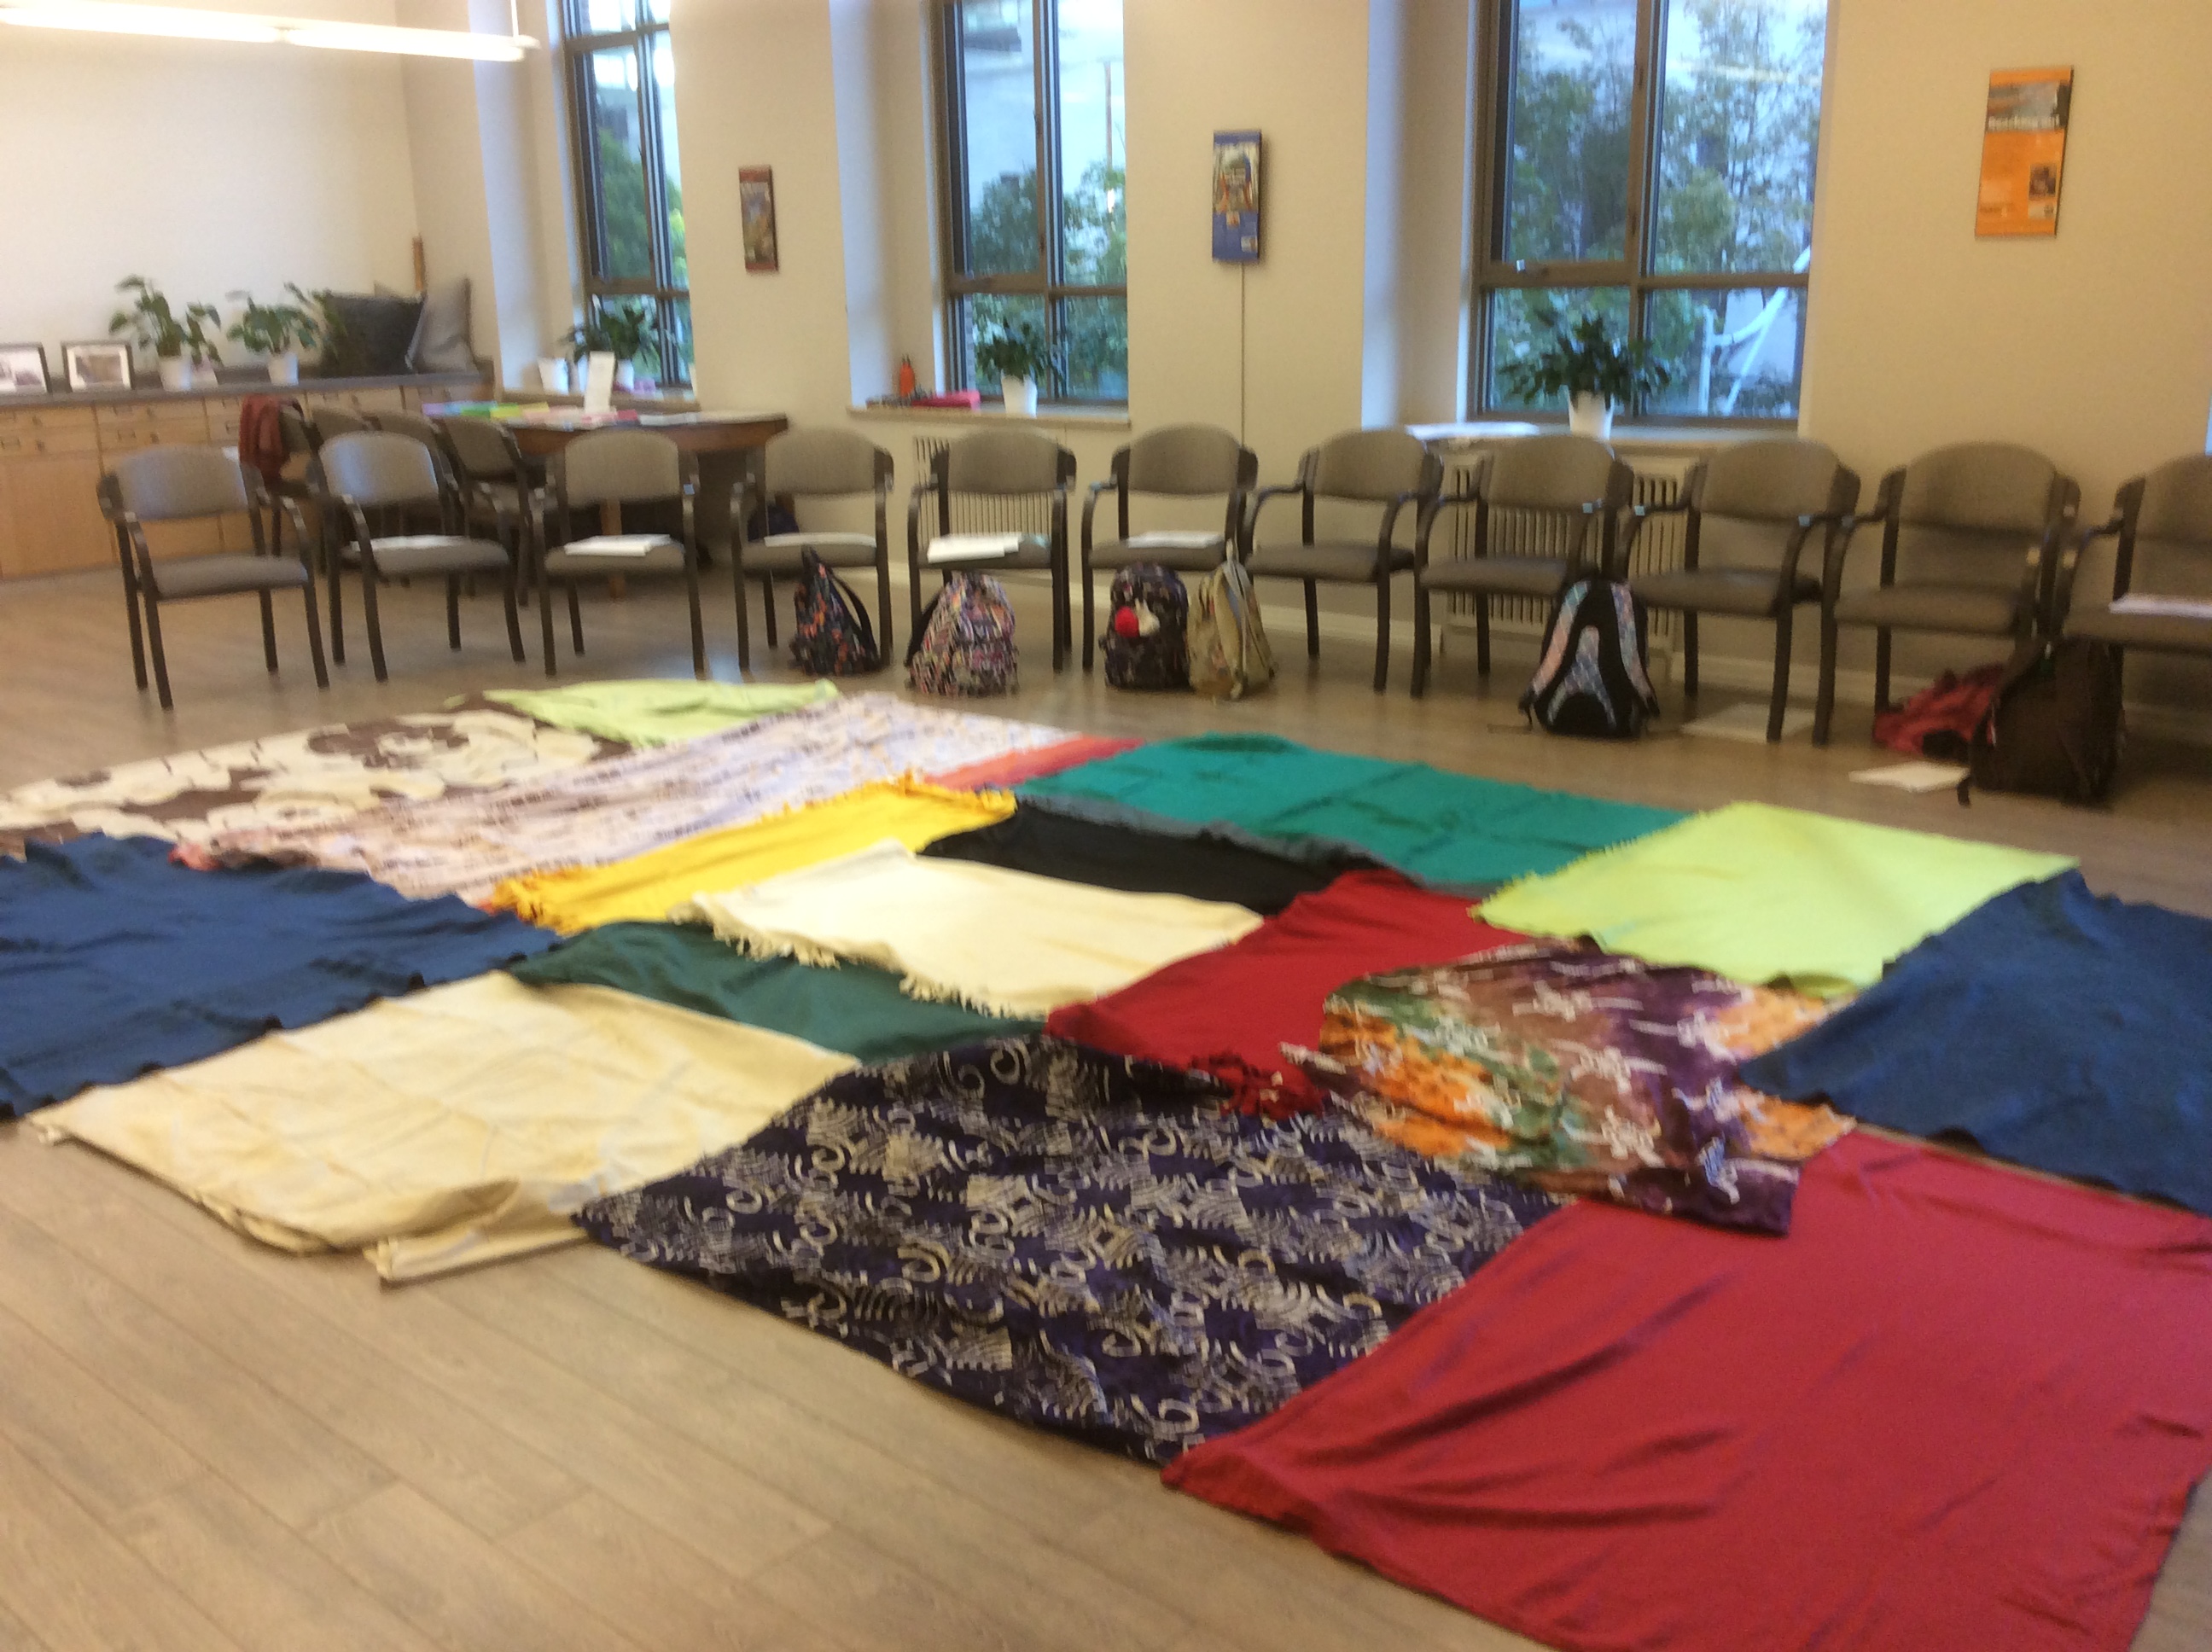 The beginning of The Kairos Blanket Exercise.  The participants sit in a circle with blankets placed on the floor in the centre.  Students from St. Joseph's College Wellesley are participating in learning with Elder Bob Phillips outside.